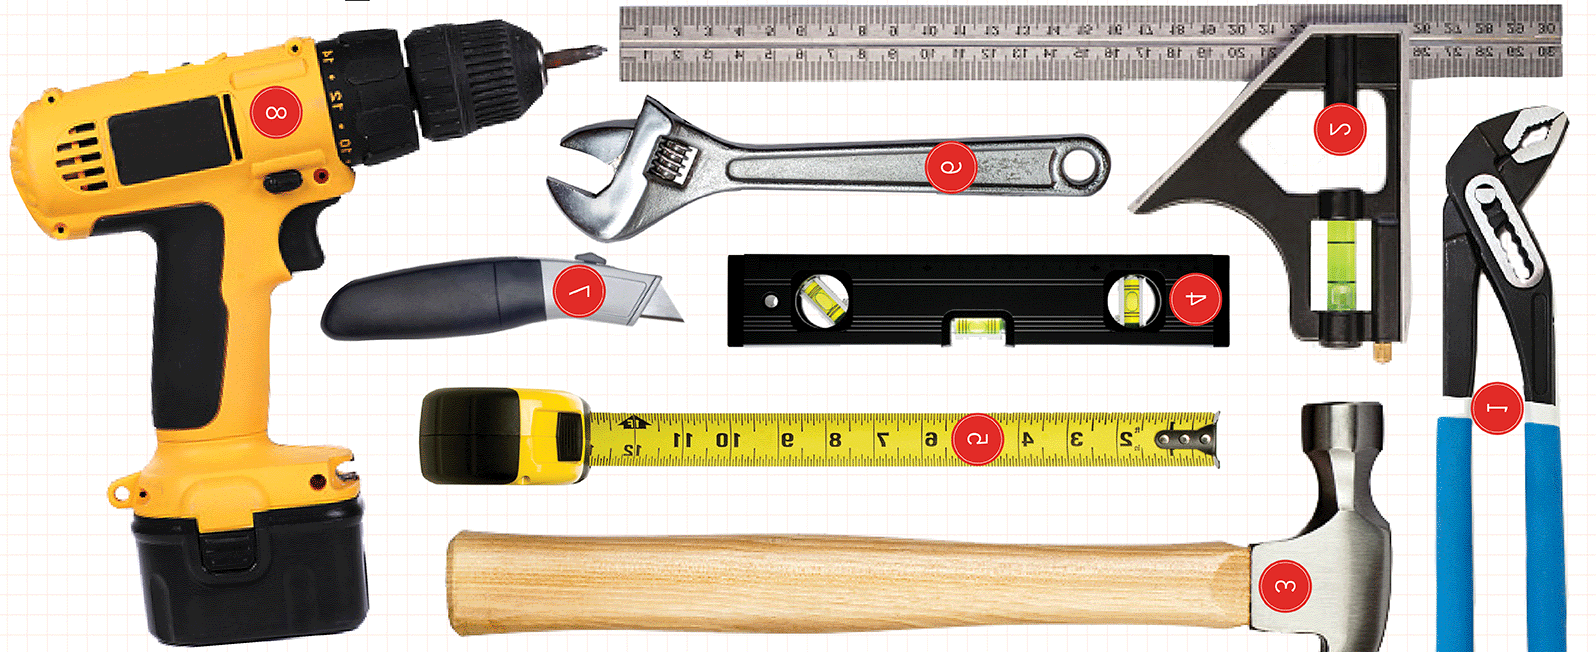 Various tools shows, such as power screwdriver, hammer, tape measure, and pliers.